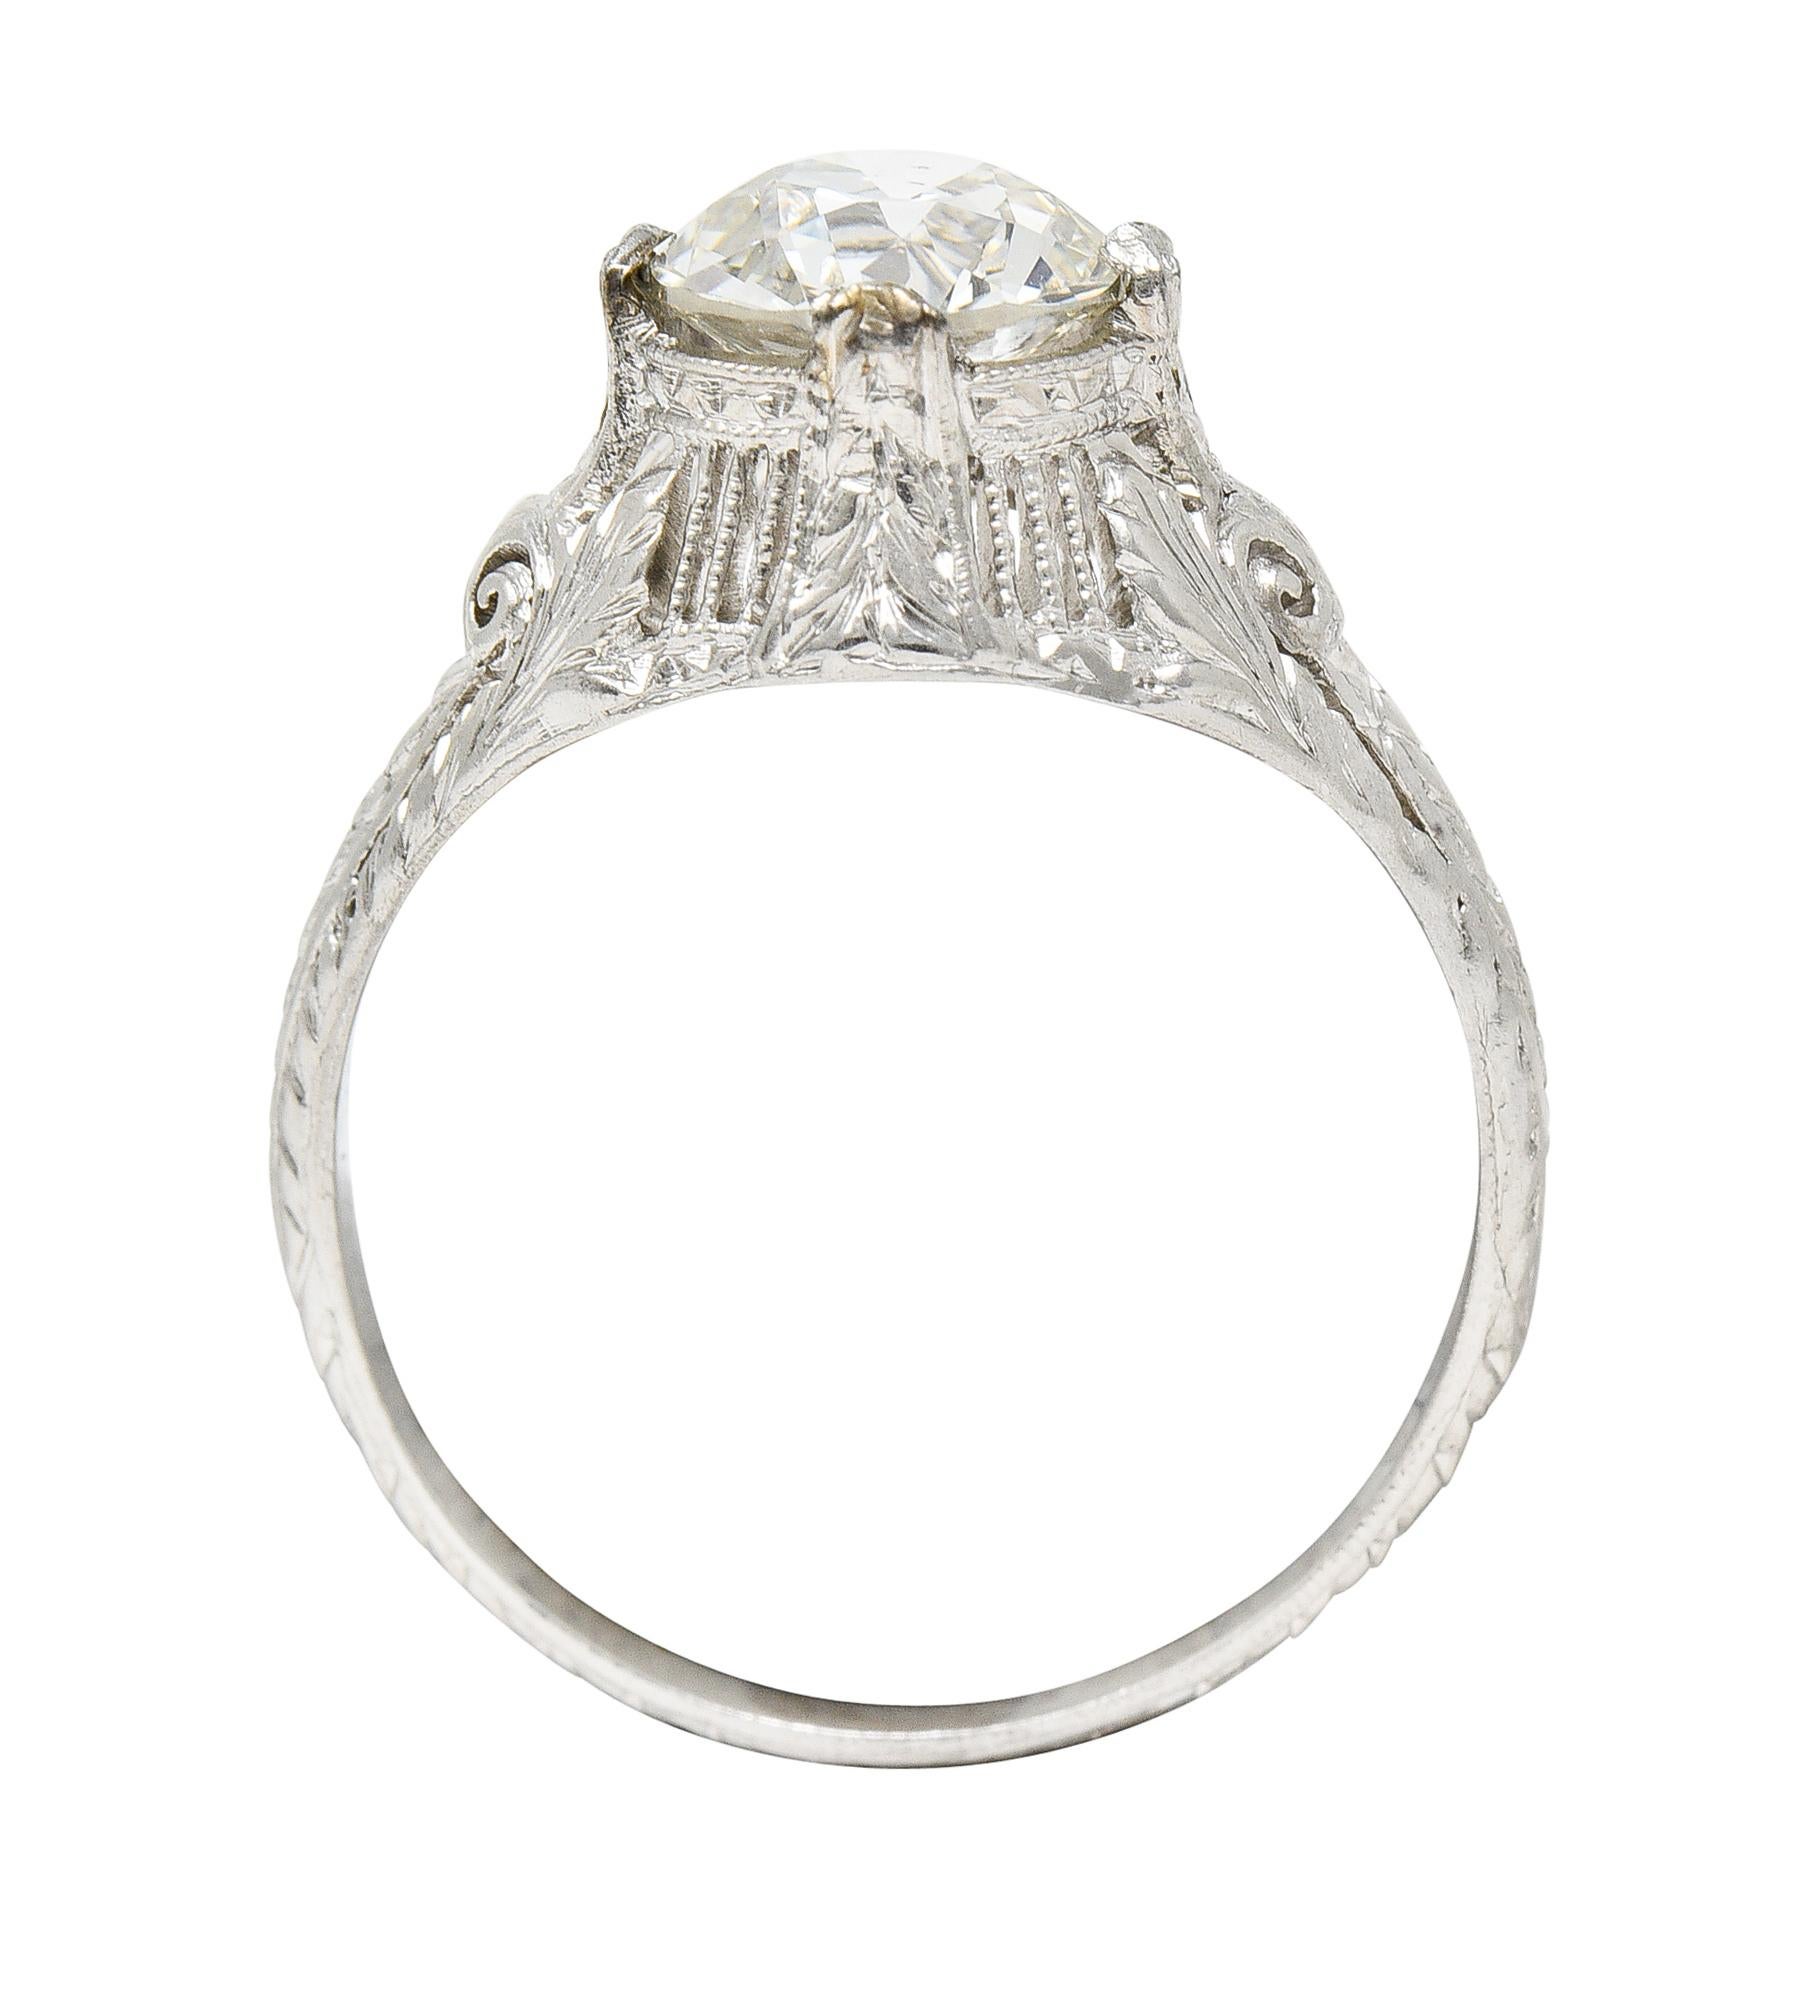 Late Edwardian 1.25 Carats Old European Cut Diamond Platinum Engagement Ring GIA For Sale 5